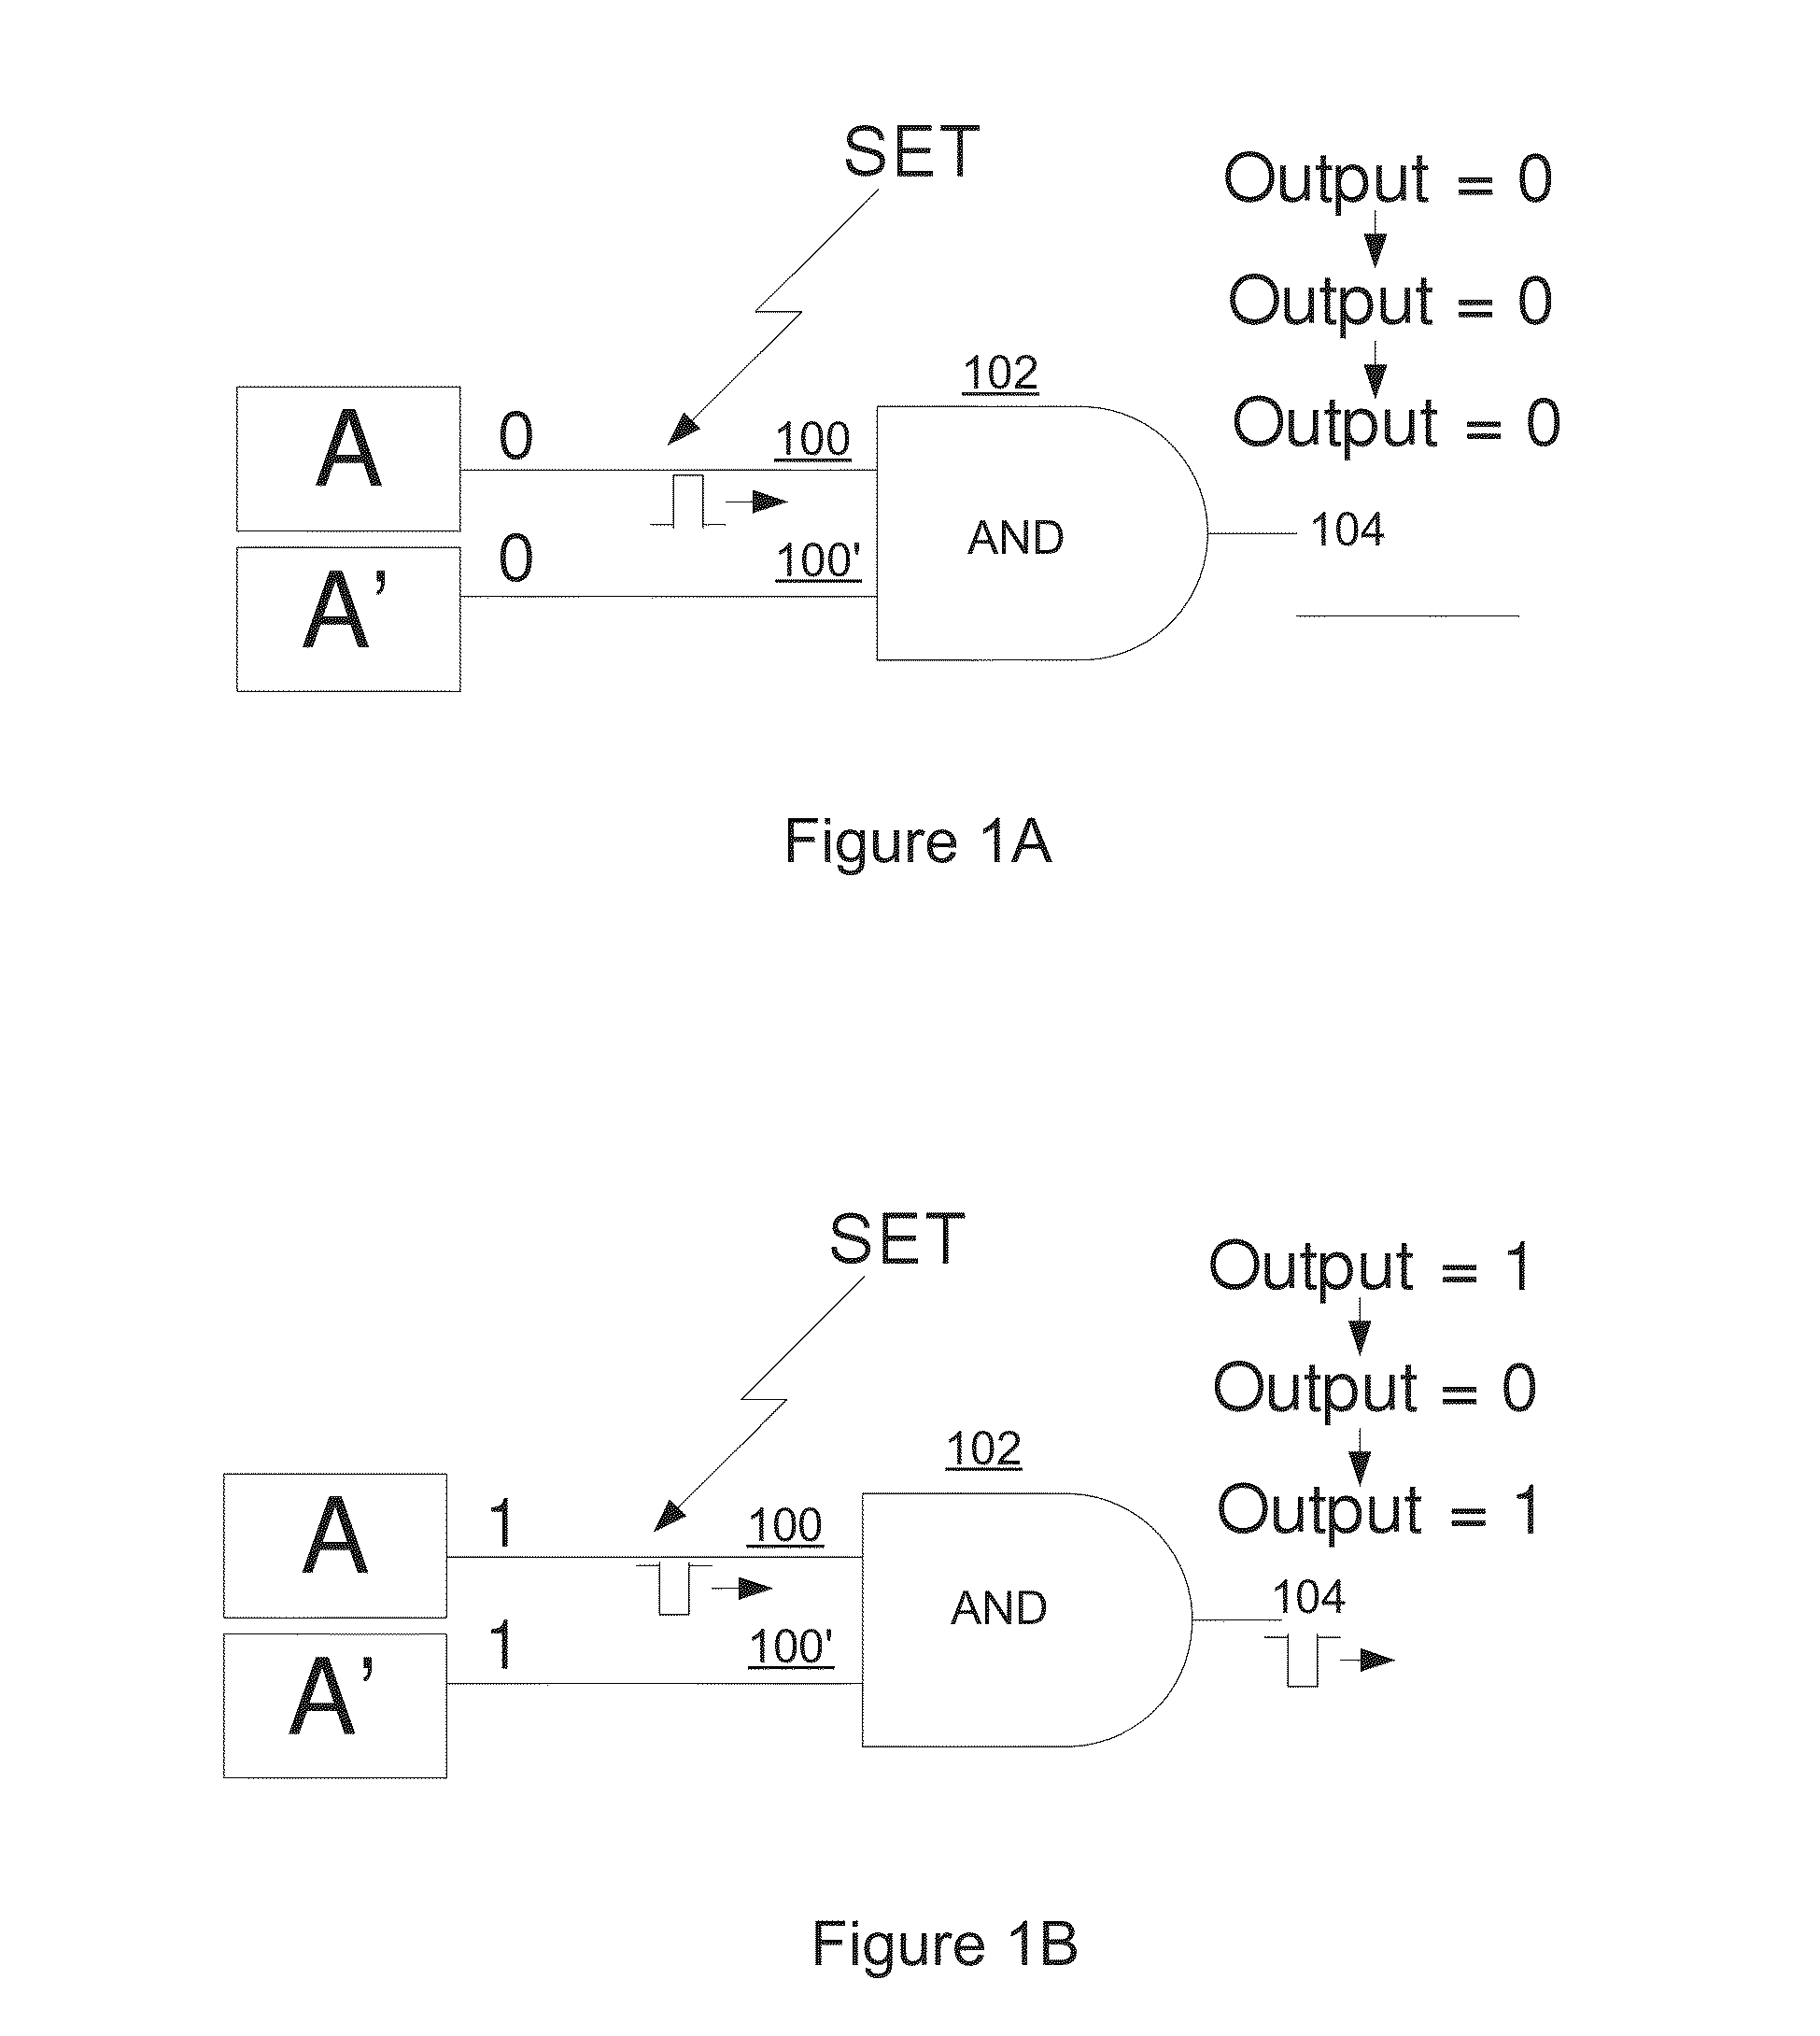 Method and circuit structure for suppressing single event transients or glitches in digital electronic circuits